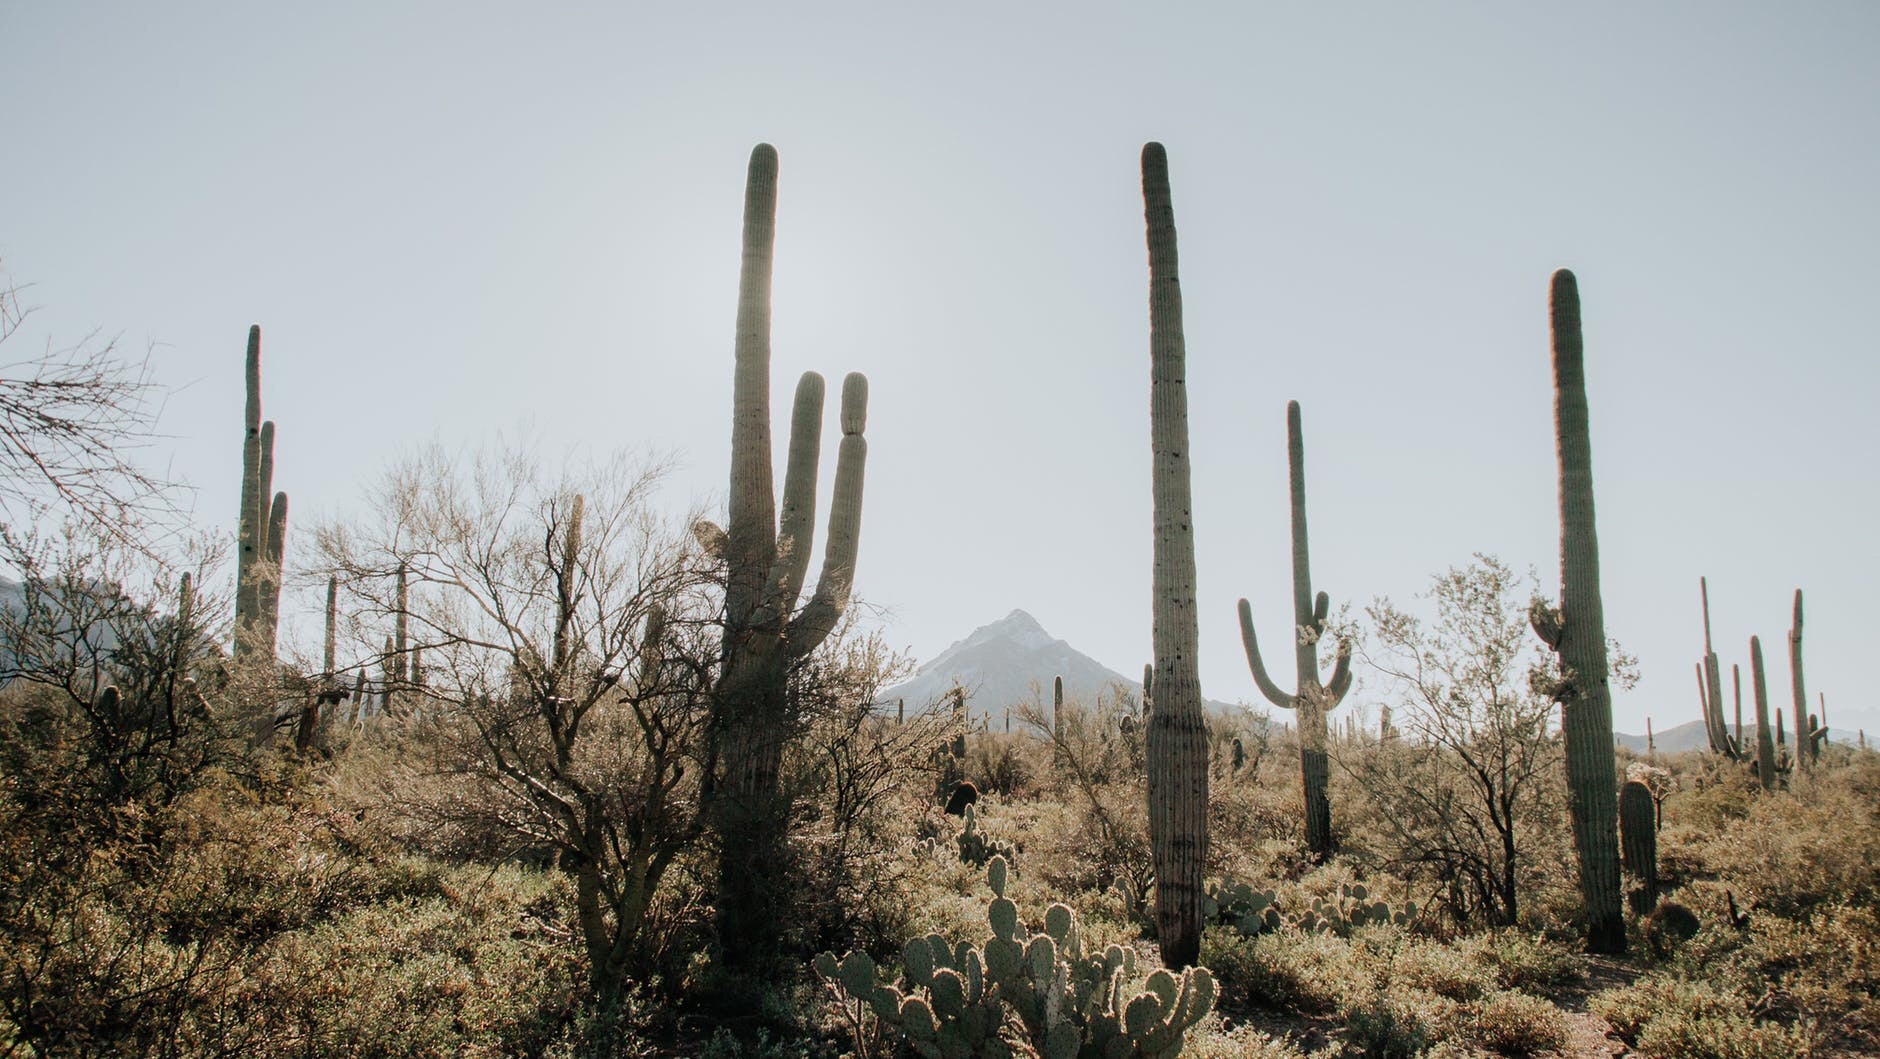 A Cactus Point of View - I’m going to write about being what it would be like if I was a cactus. #Cactus (pexels-photo-2749600)